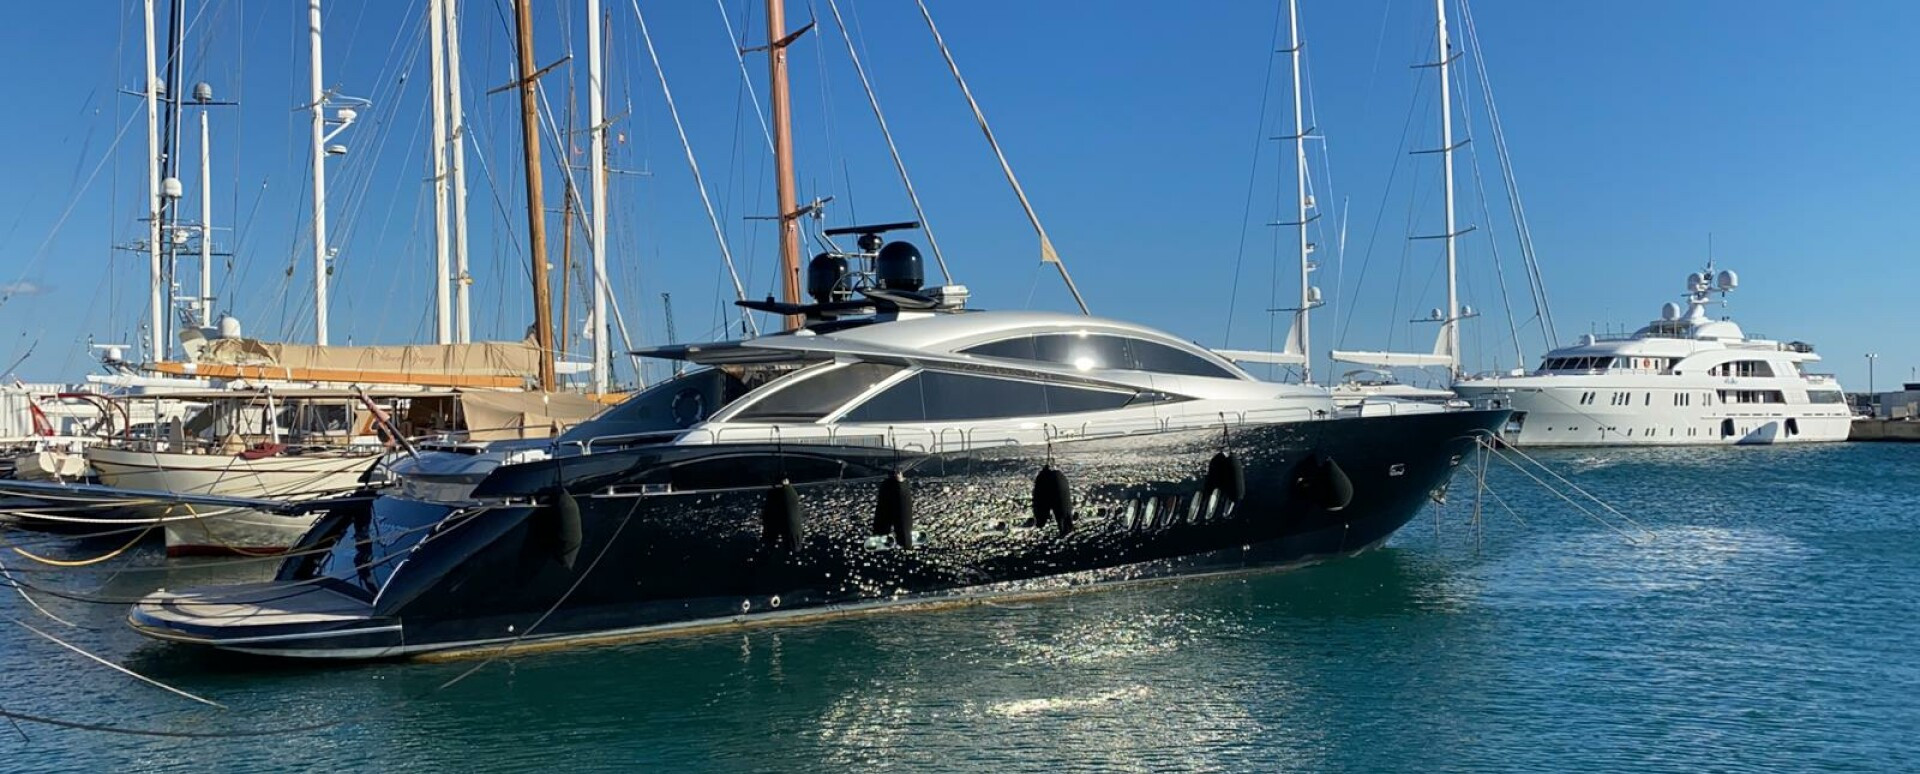                                                                                                     M/Y ICEMAN Keenly For SALE
                                                                                            